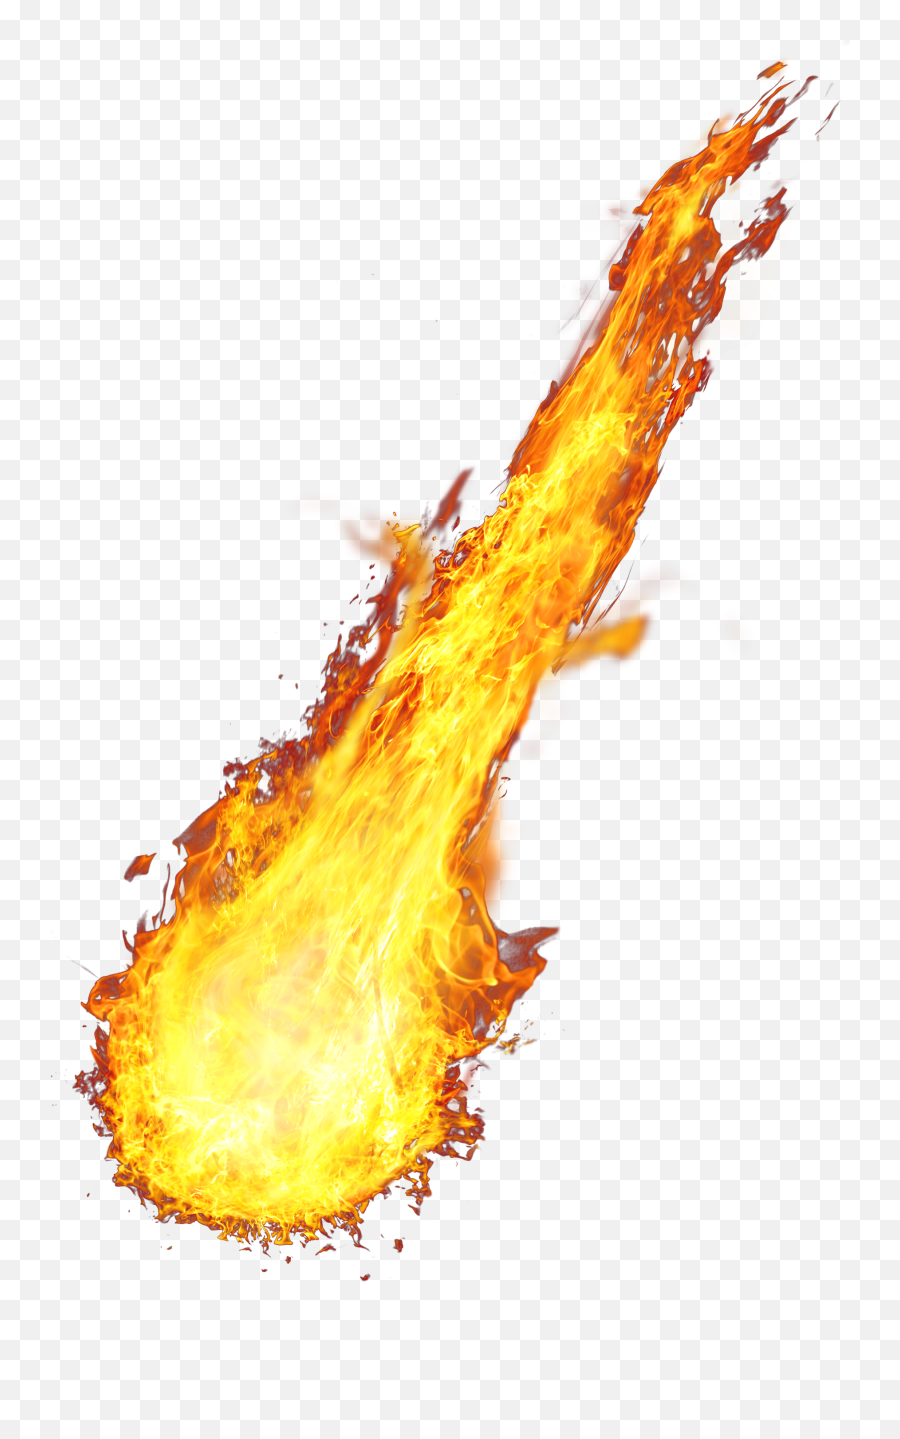 Fire Gif Transparent Background Posted By Sarah Anderson - Fire Png Emoji,Fire Emoji No Background